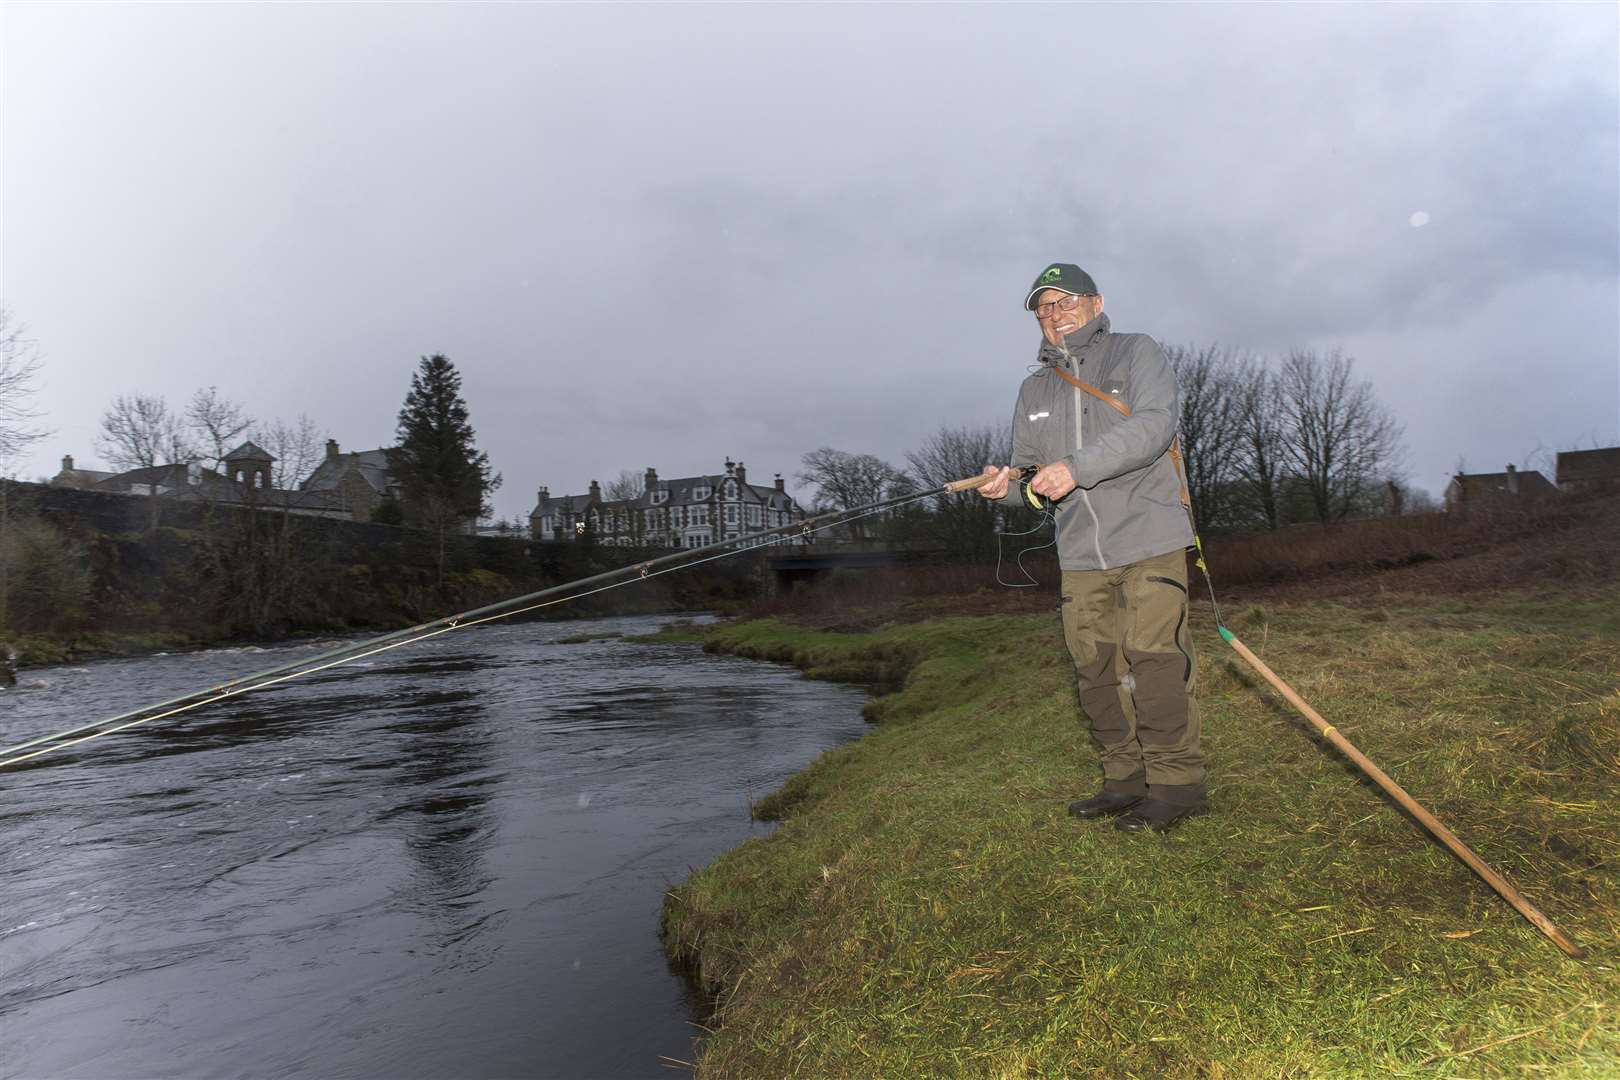 In damp and dull conditions on Saturday morning, 81-year-old retired landscape garden Freddie Sutherland, from Uddingston, casts the first fly of the new salmon season on the River Thurso. Picture: Robert MacDonald / Northern Studios